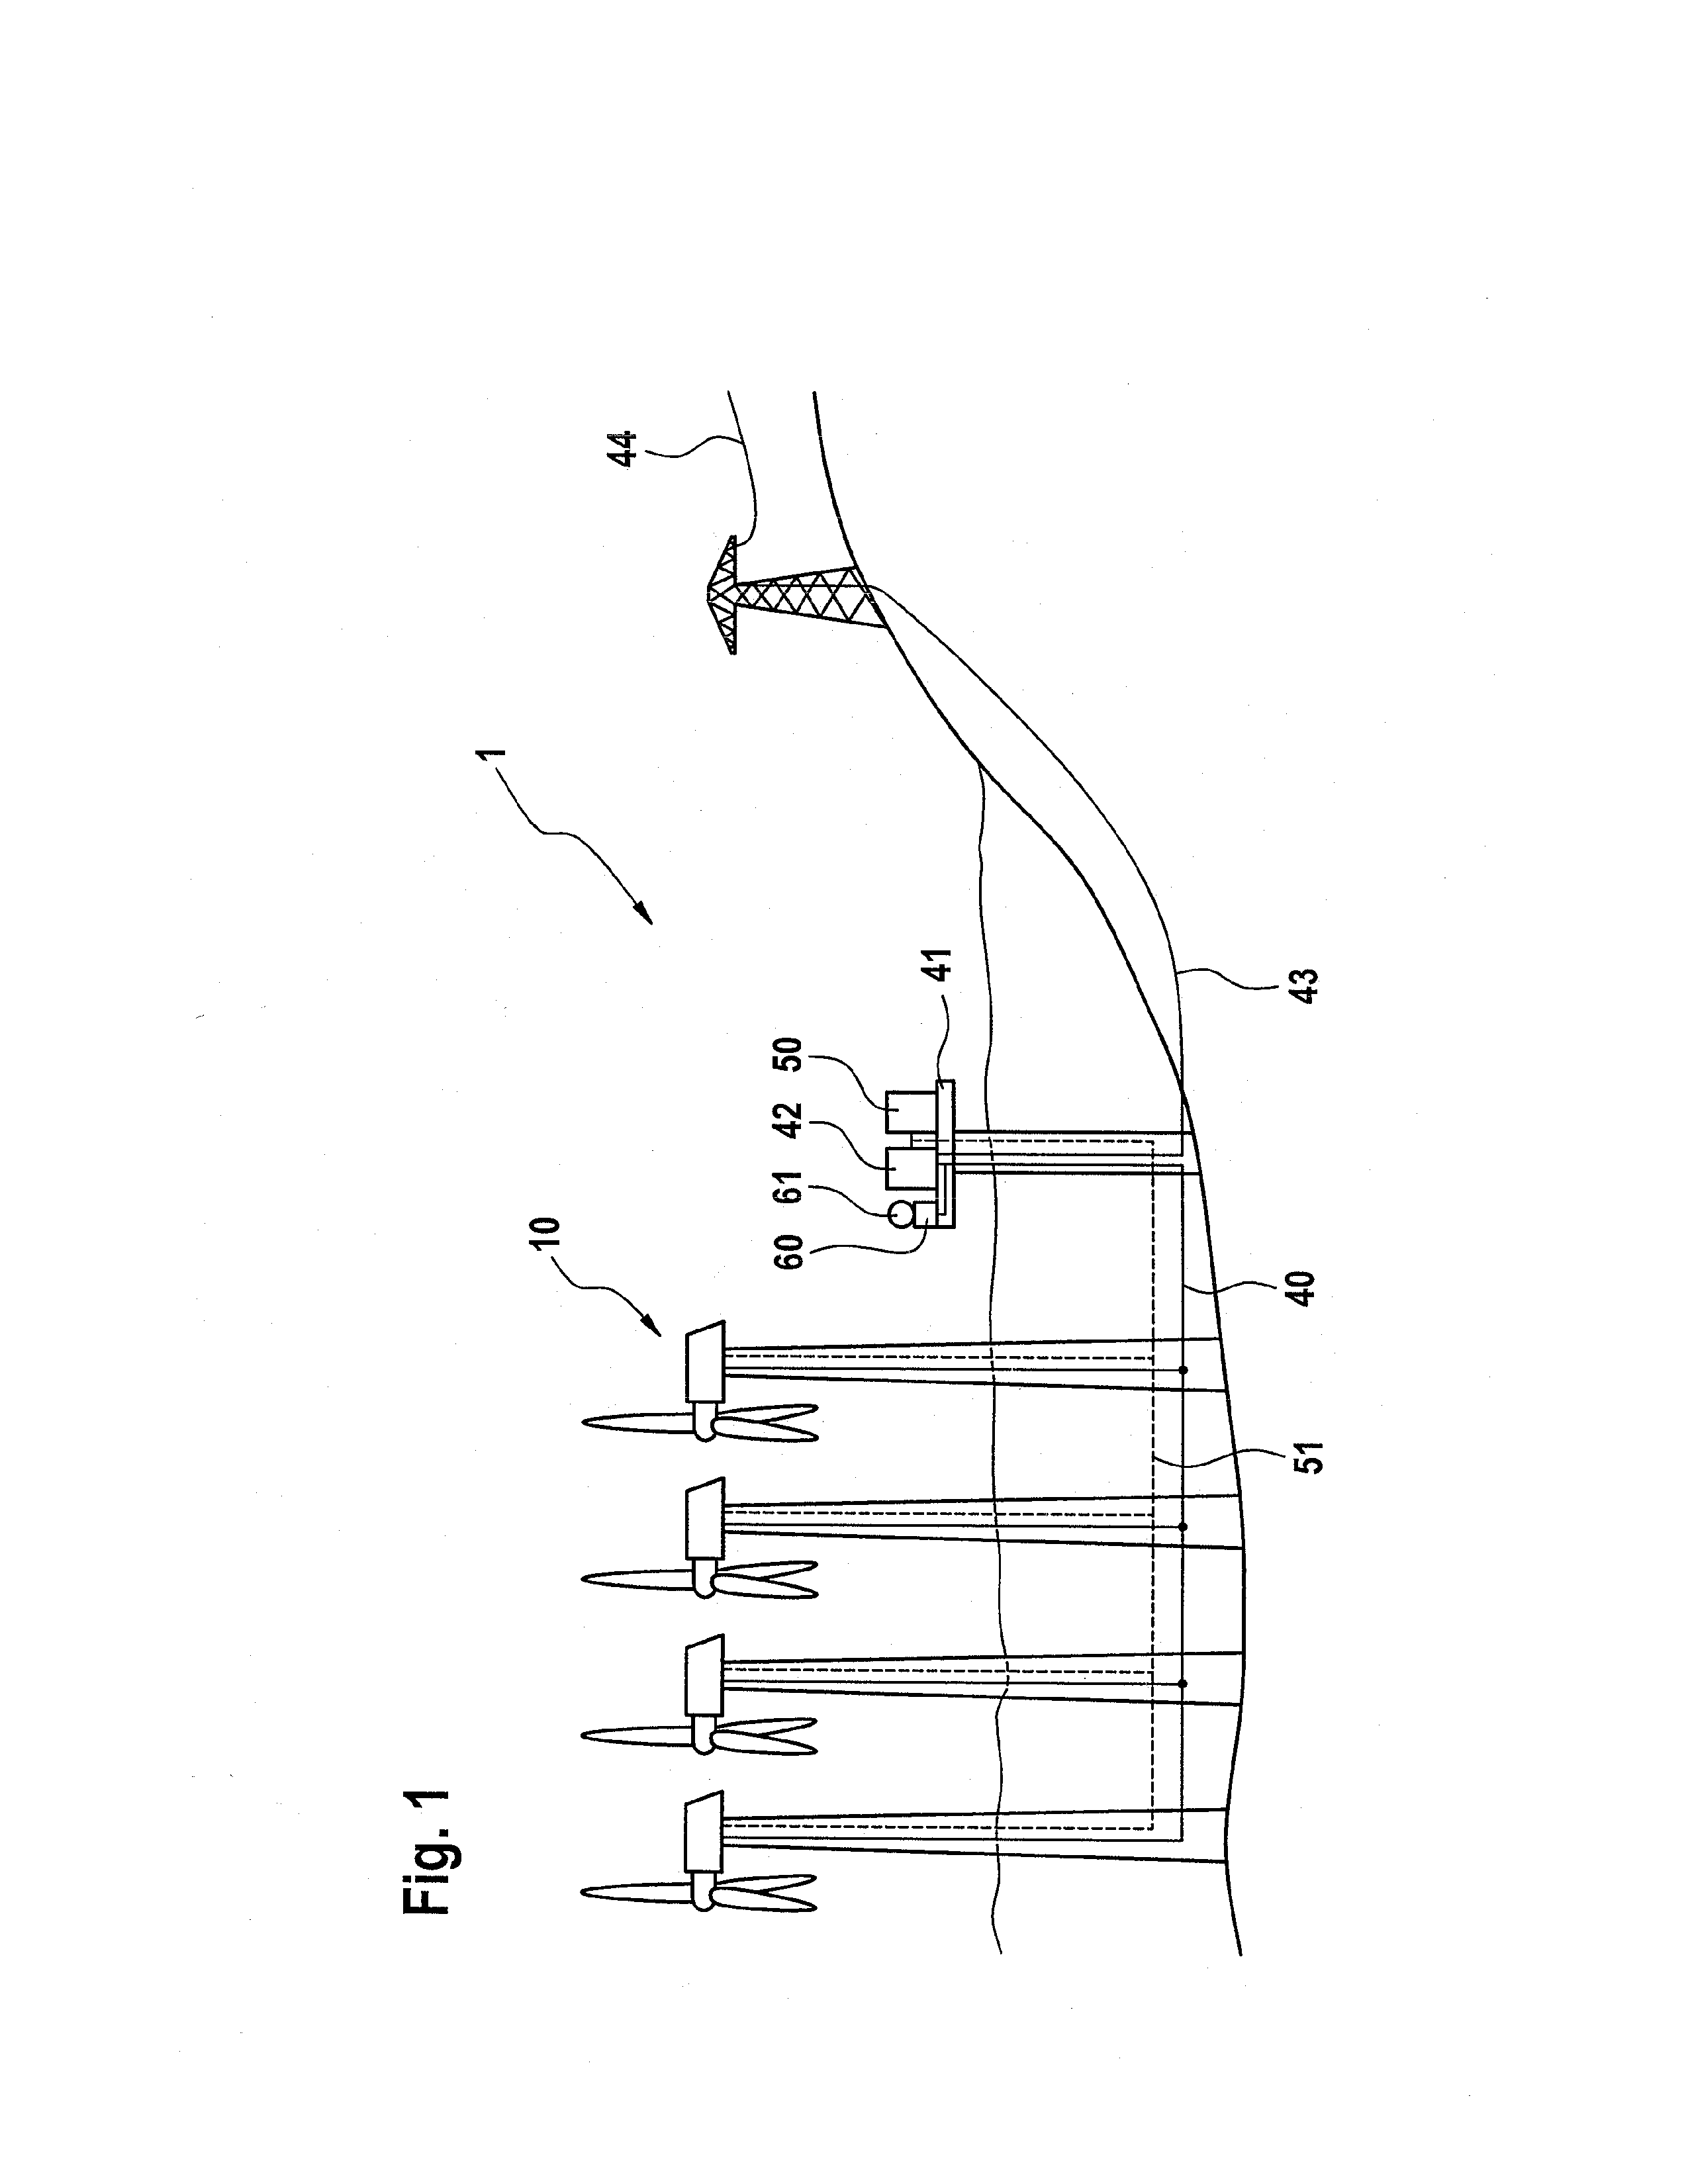 Wind farm and method for operating a wind farm